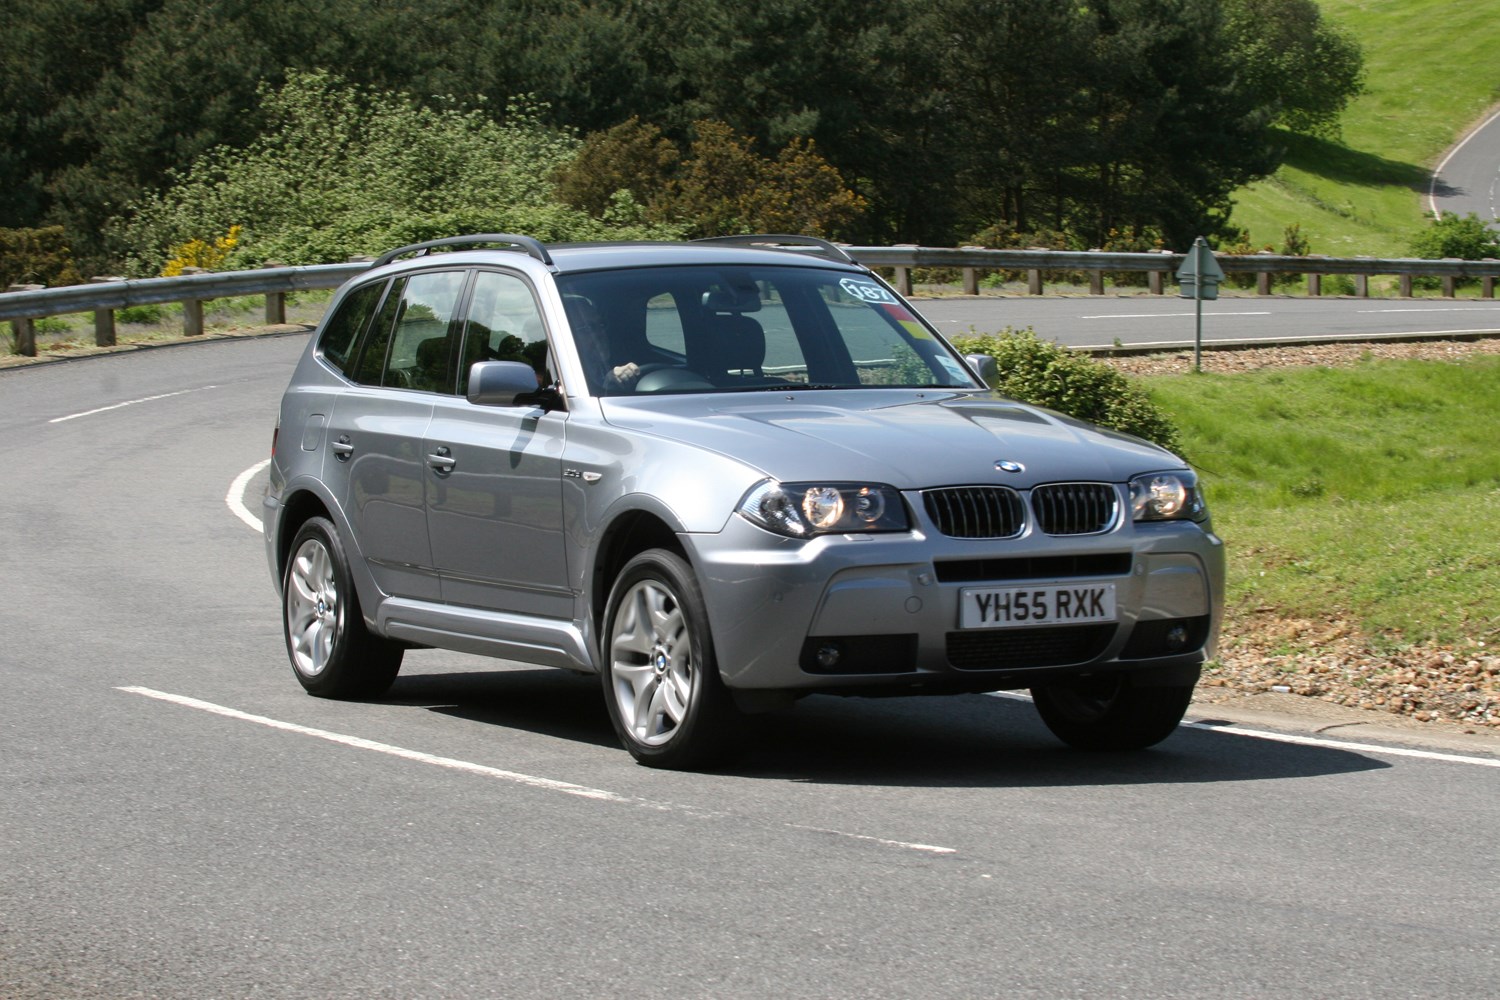 Borrow nightmare Withered Used BMW X3 Estate (2004 - 2010) Review | Parkers